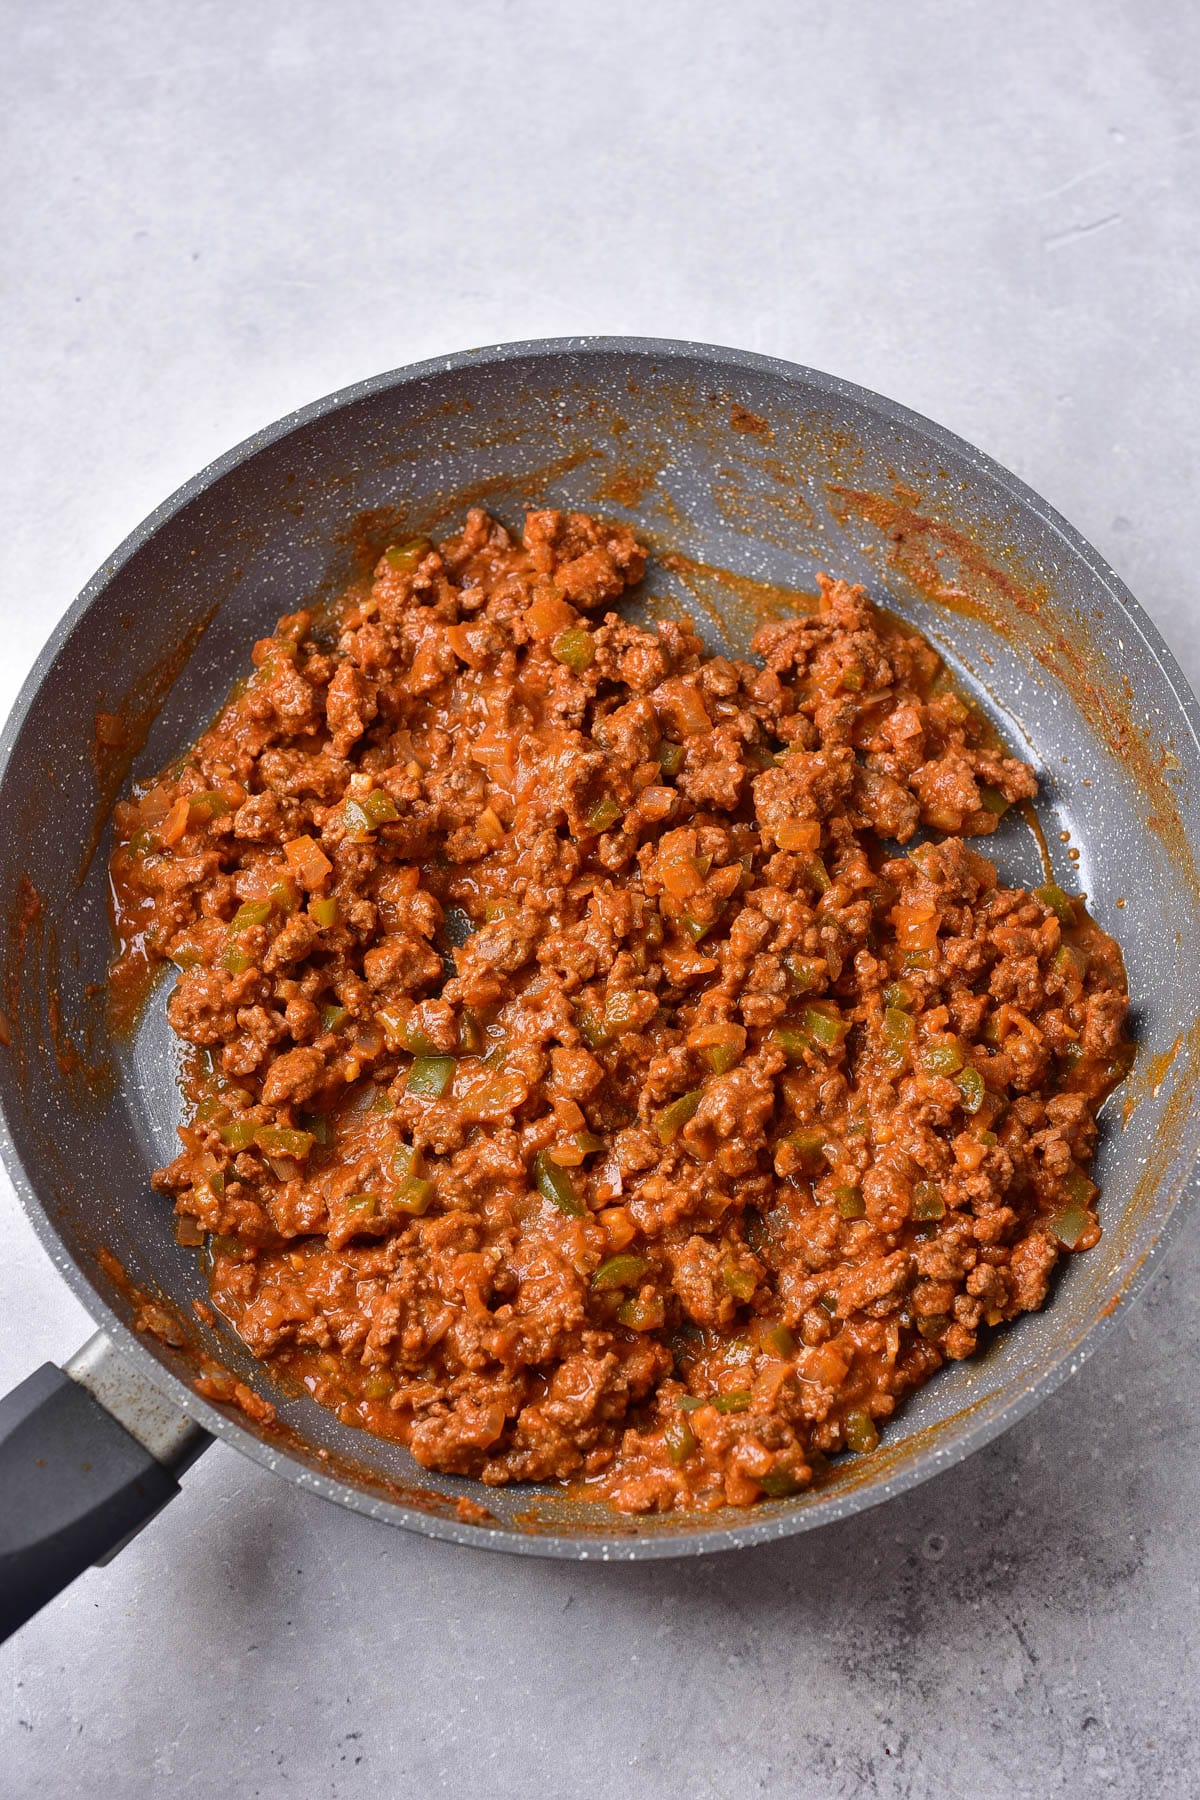 Ground beef with tomato based sauce in skillet.